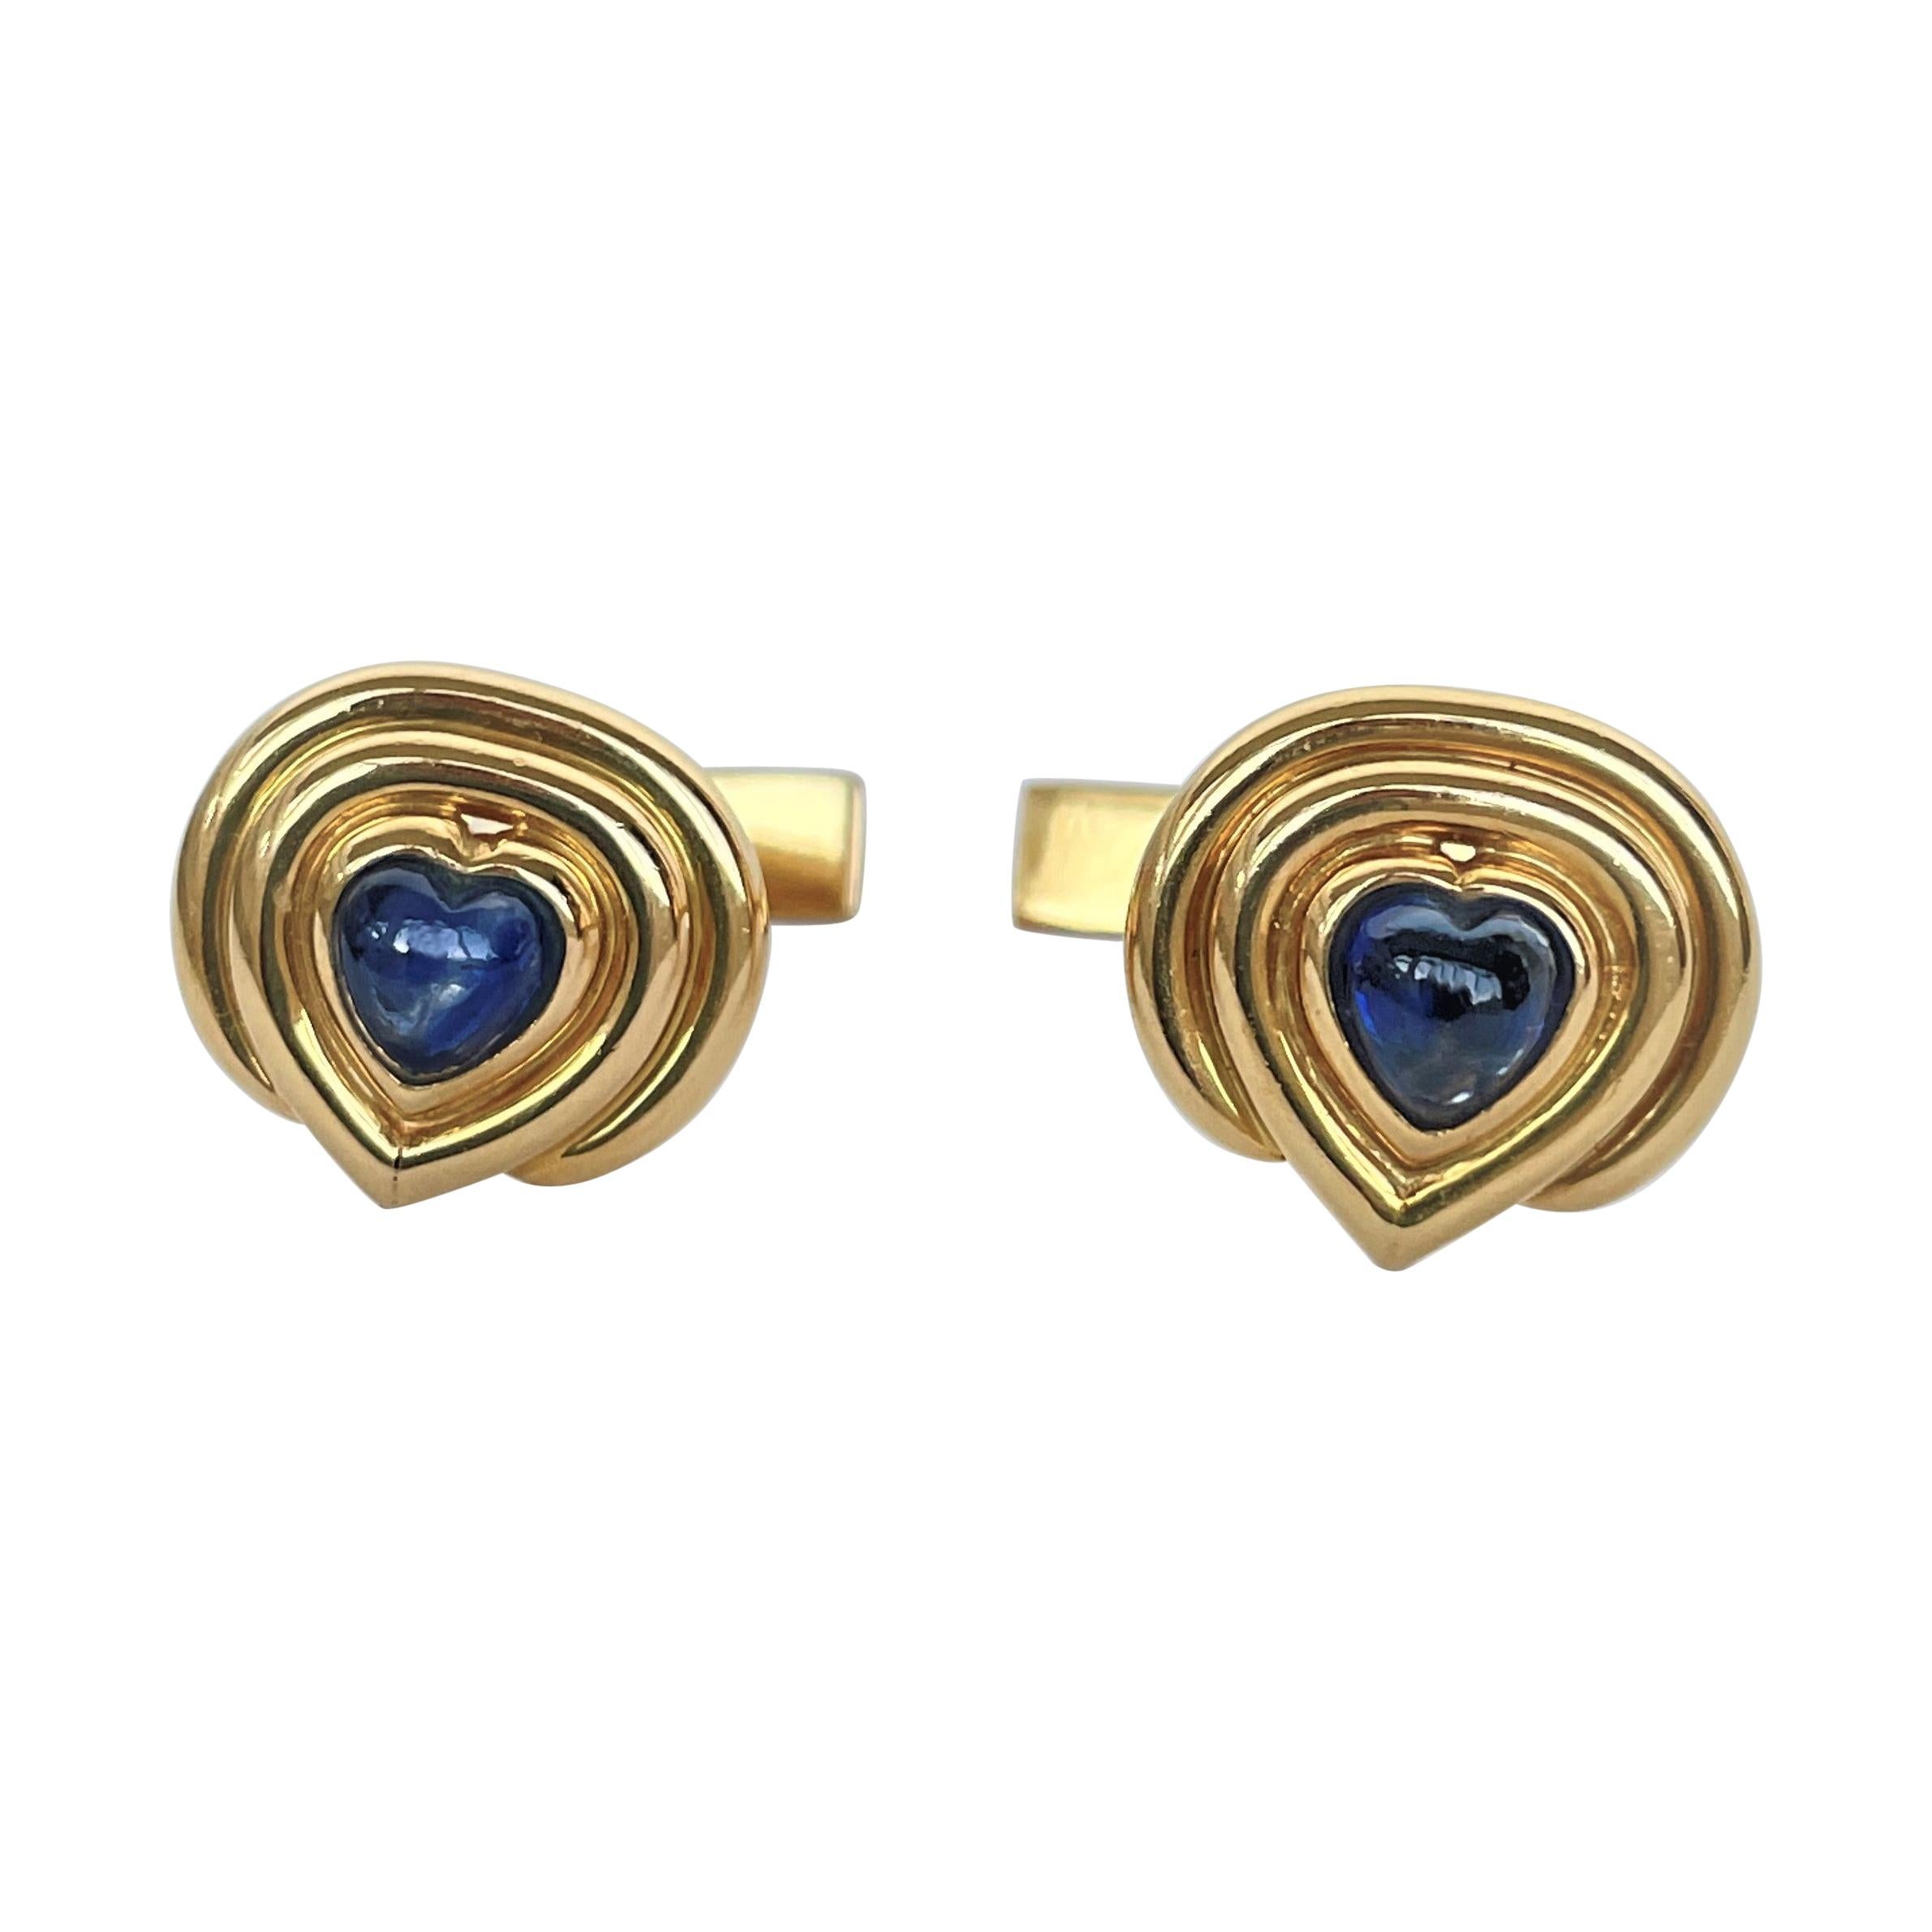 Rosior Contemporary "Cabochon" Blue Sapphire and Yellow Gold Cufflinks